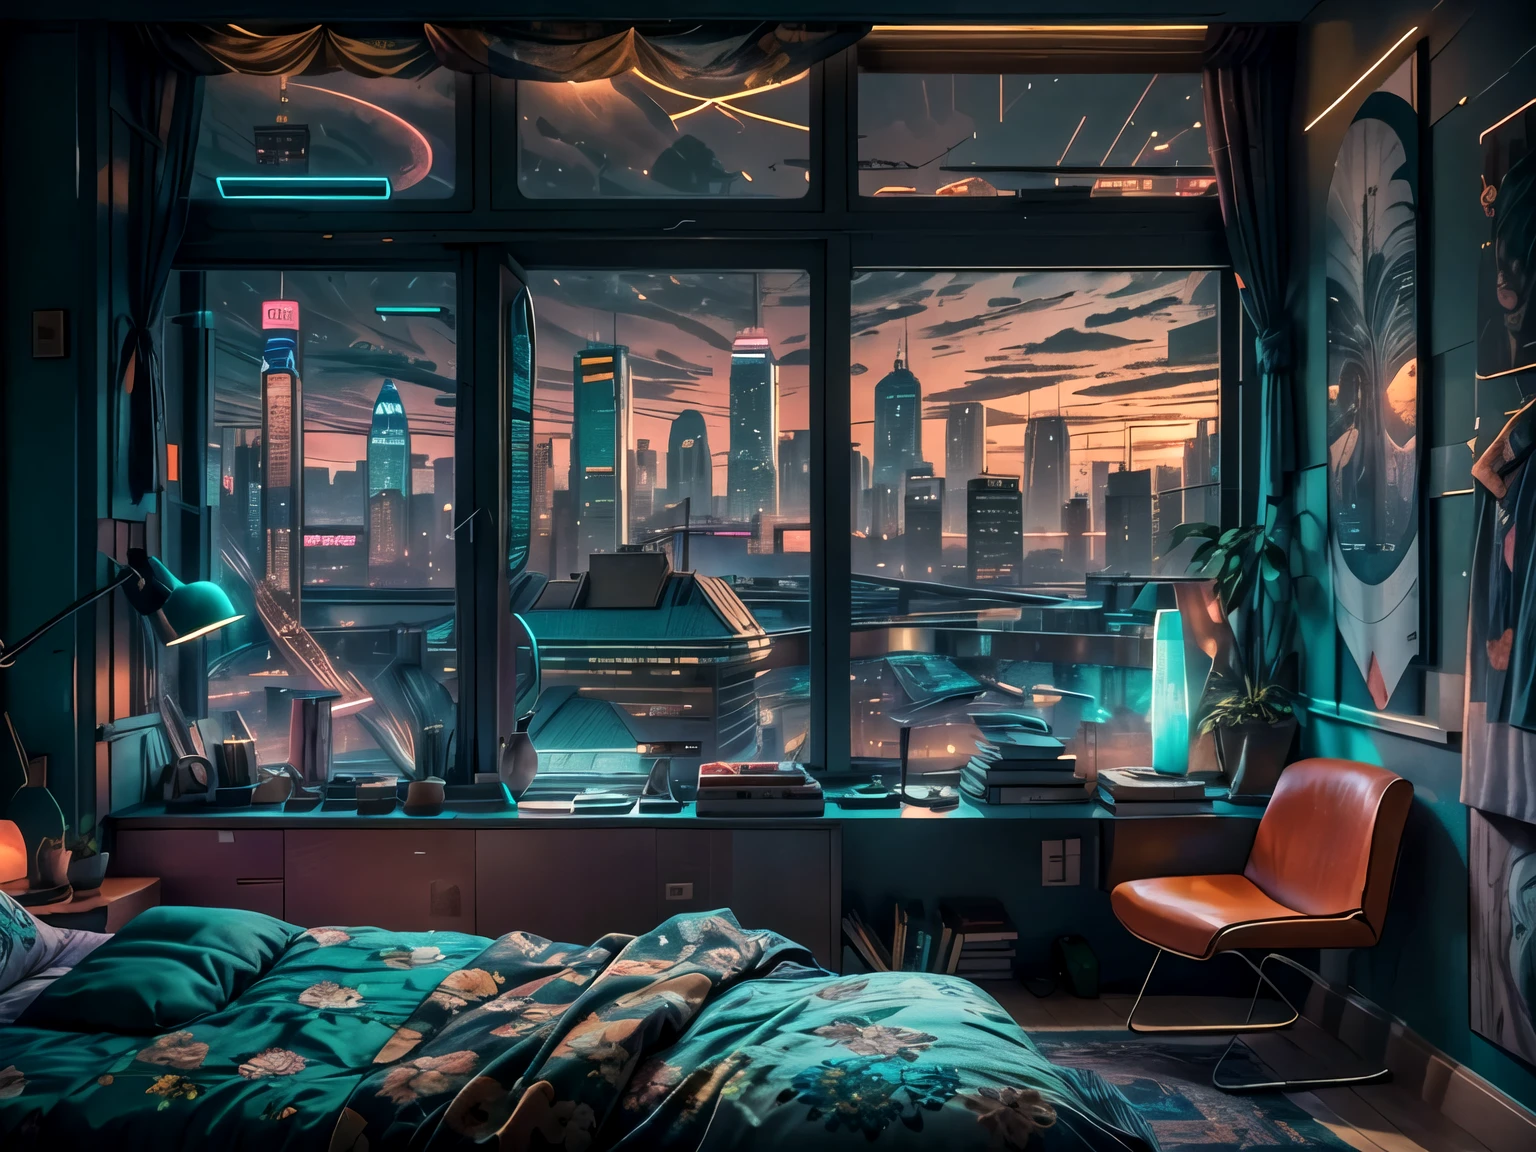 This a (((masterpiece))). Generate a cozy bedroom with a large window directly in front of the camera. The bedroom should be cool and peaceful, with retro furnishings and accessories. Through the window is brilliant cyberpunk city awash with neon light and blinking, colorful signs. It is nighttime, and the city is much brighter than the interior of the room. Contrast the peaceful interior of the bedroom with the busy, ultra-detailed cityscape seen through the window. The perspective of this artwork is from inside the bedroom looking out. 